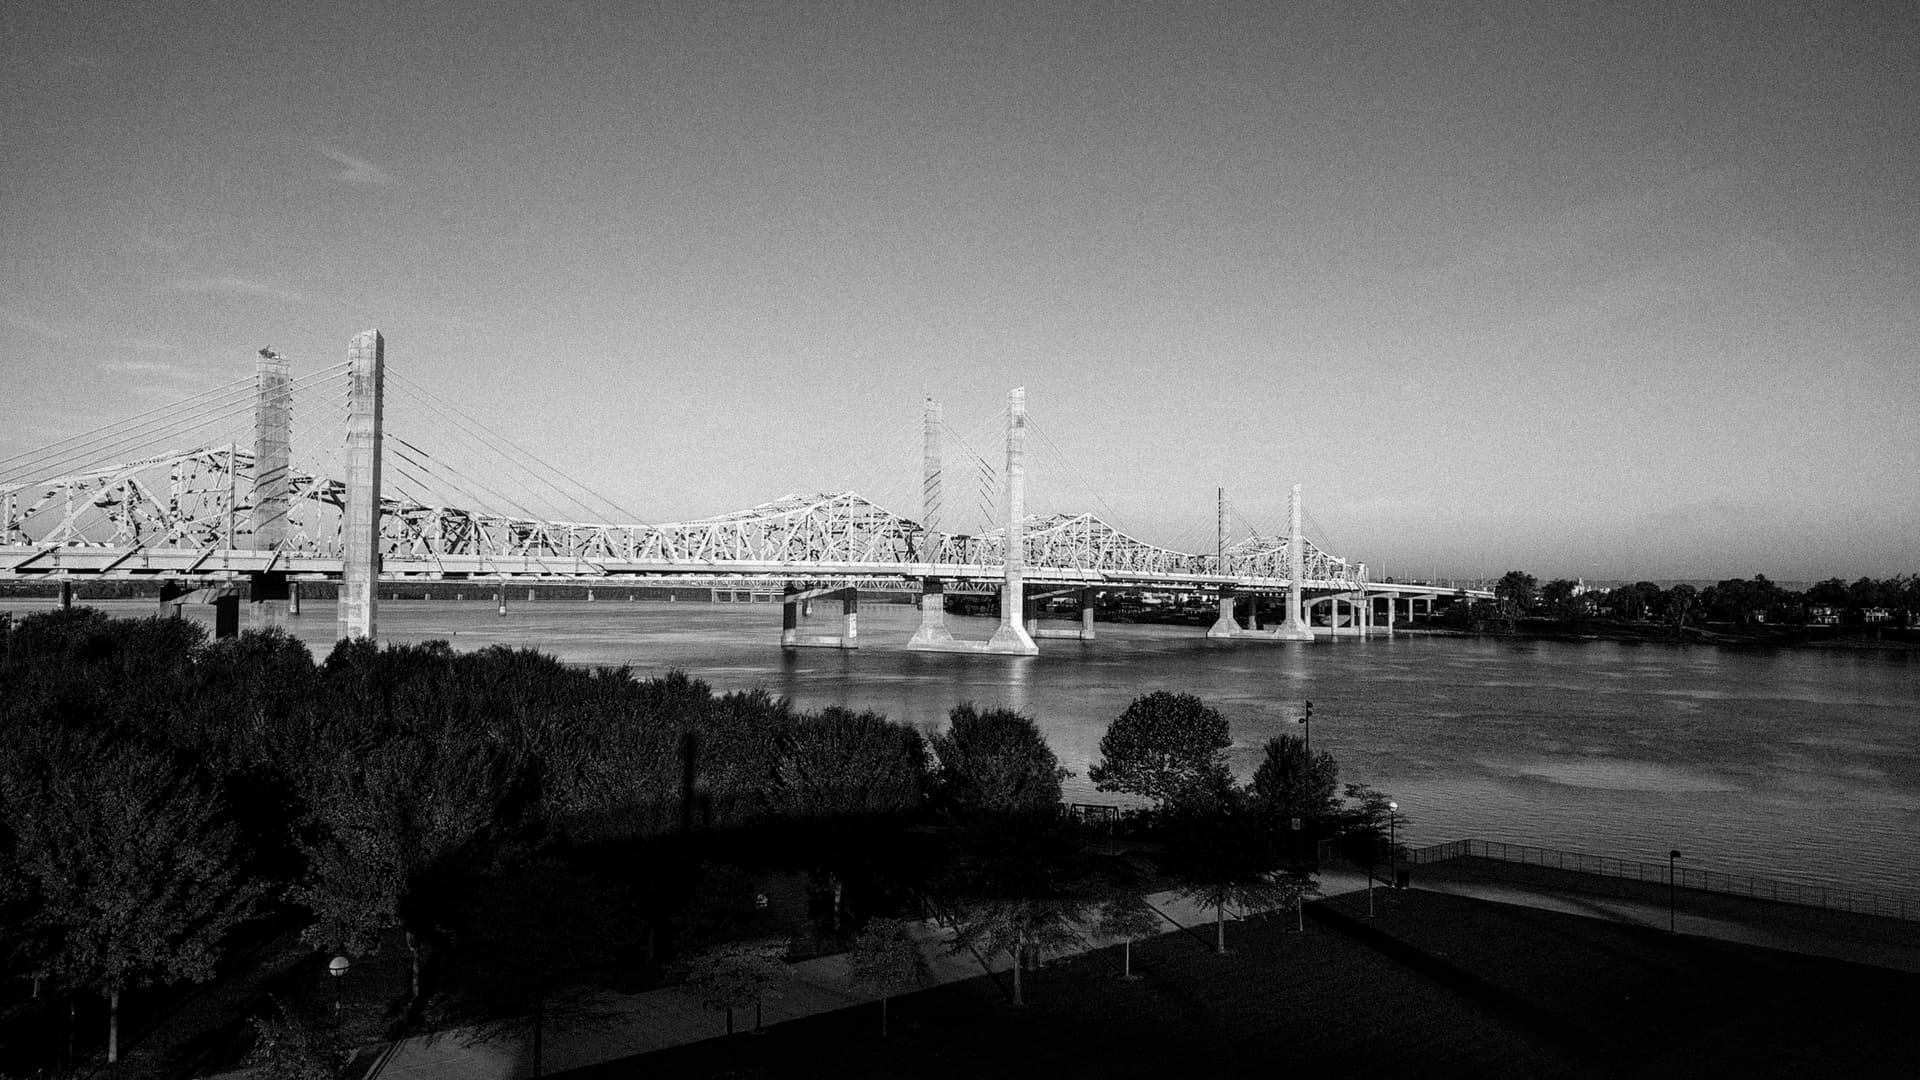 A black-and-white photograph of a brutalist suspension bridge of white steel and concrete pylons crossing the Ohio River.